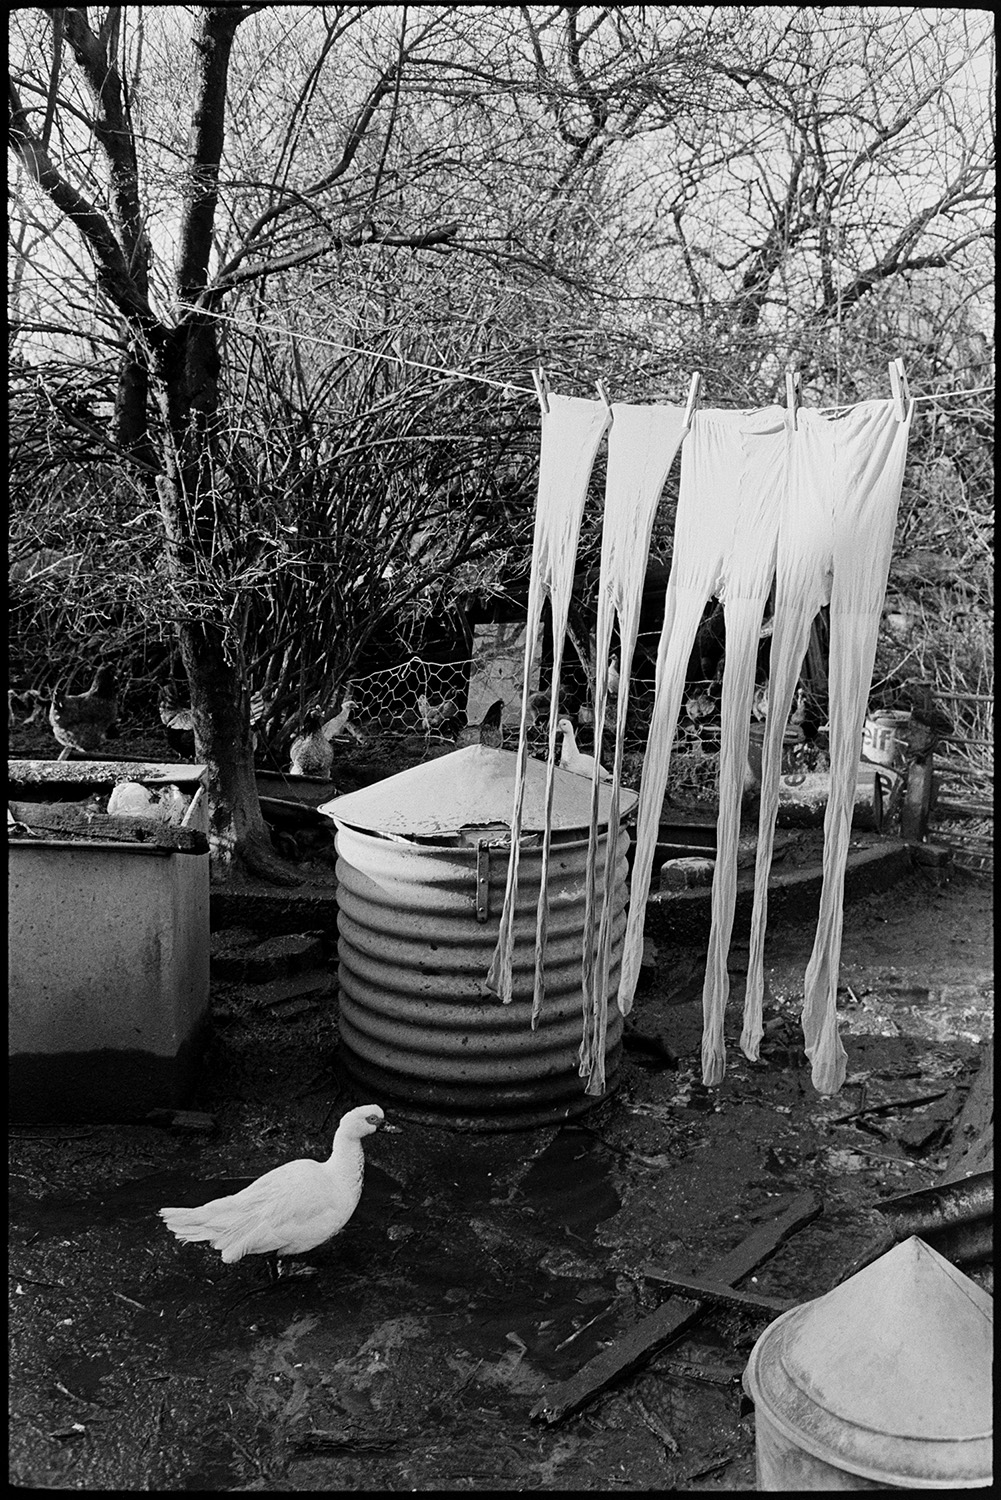 Muddy farmyard with tractor and link box, cow and collapsing old barns, tights on washing line.
[Muddy farmyard with tights hanging out to dry on a washing line, alongside metal containers and a Muscovy duck, at Cuppers Piece, Beaford. Trees, and a pen with chickens and geese is visible in the background.]